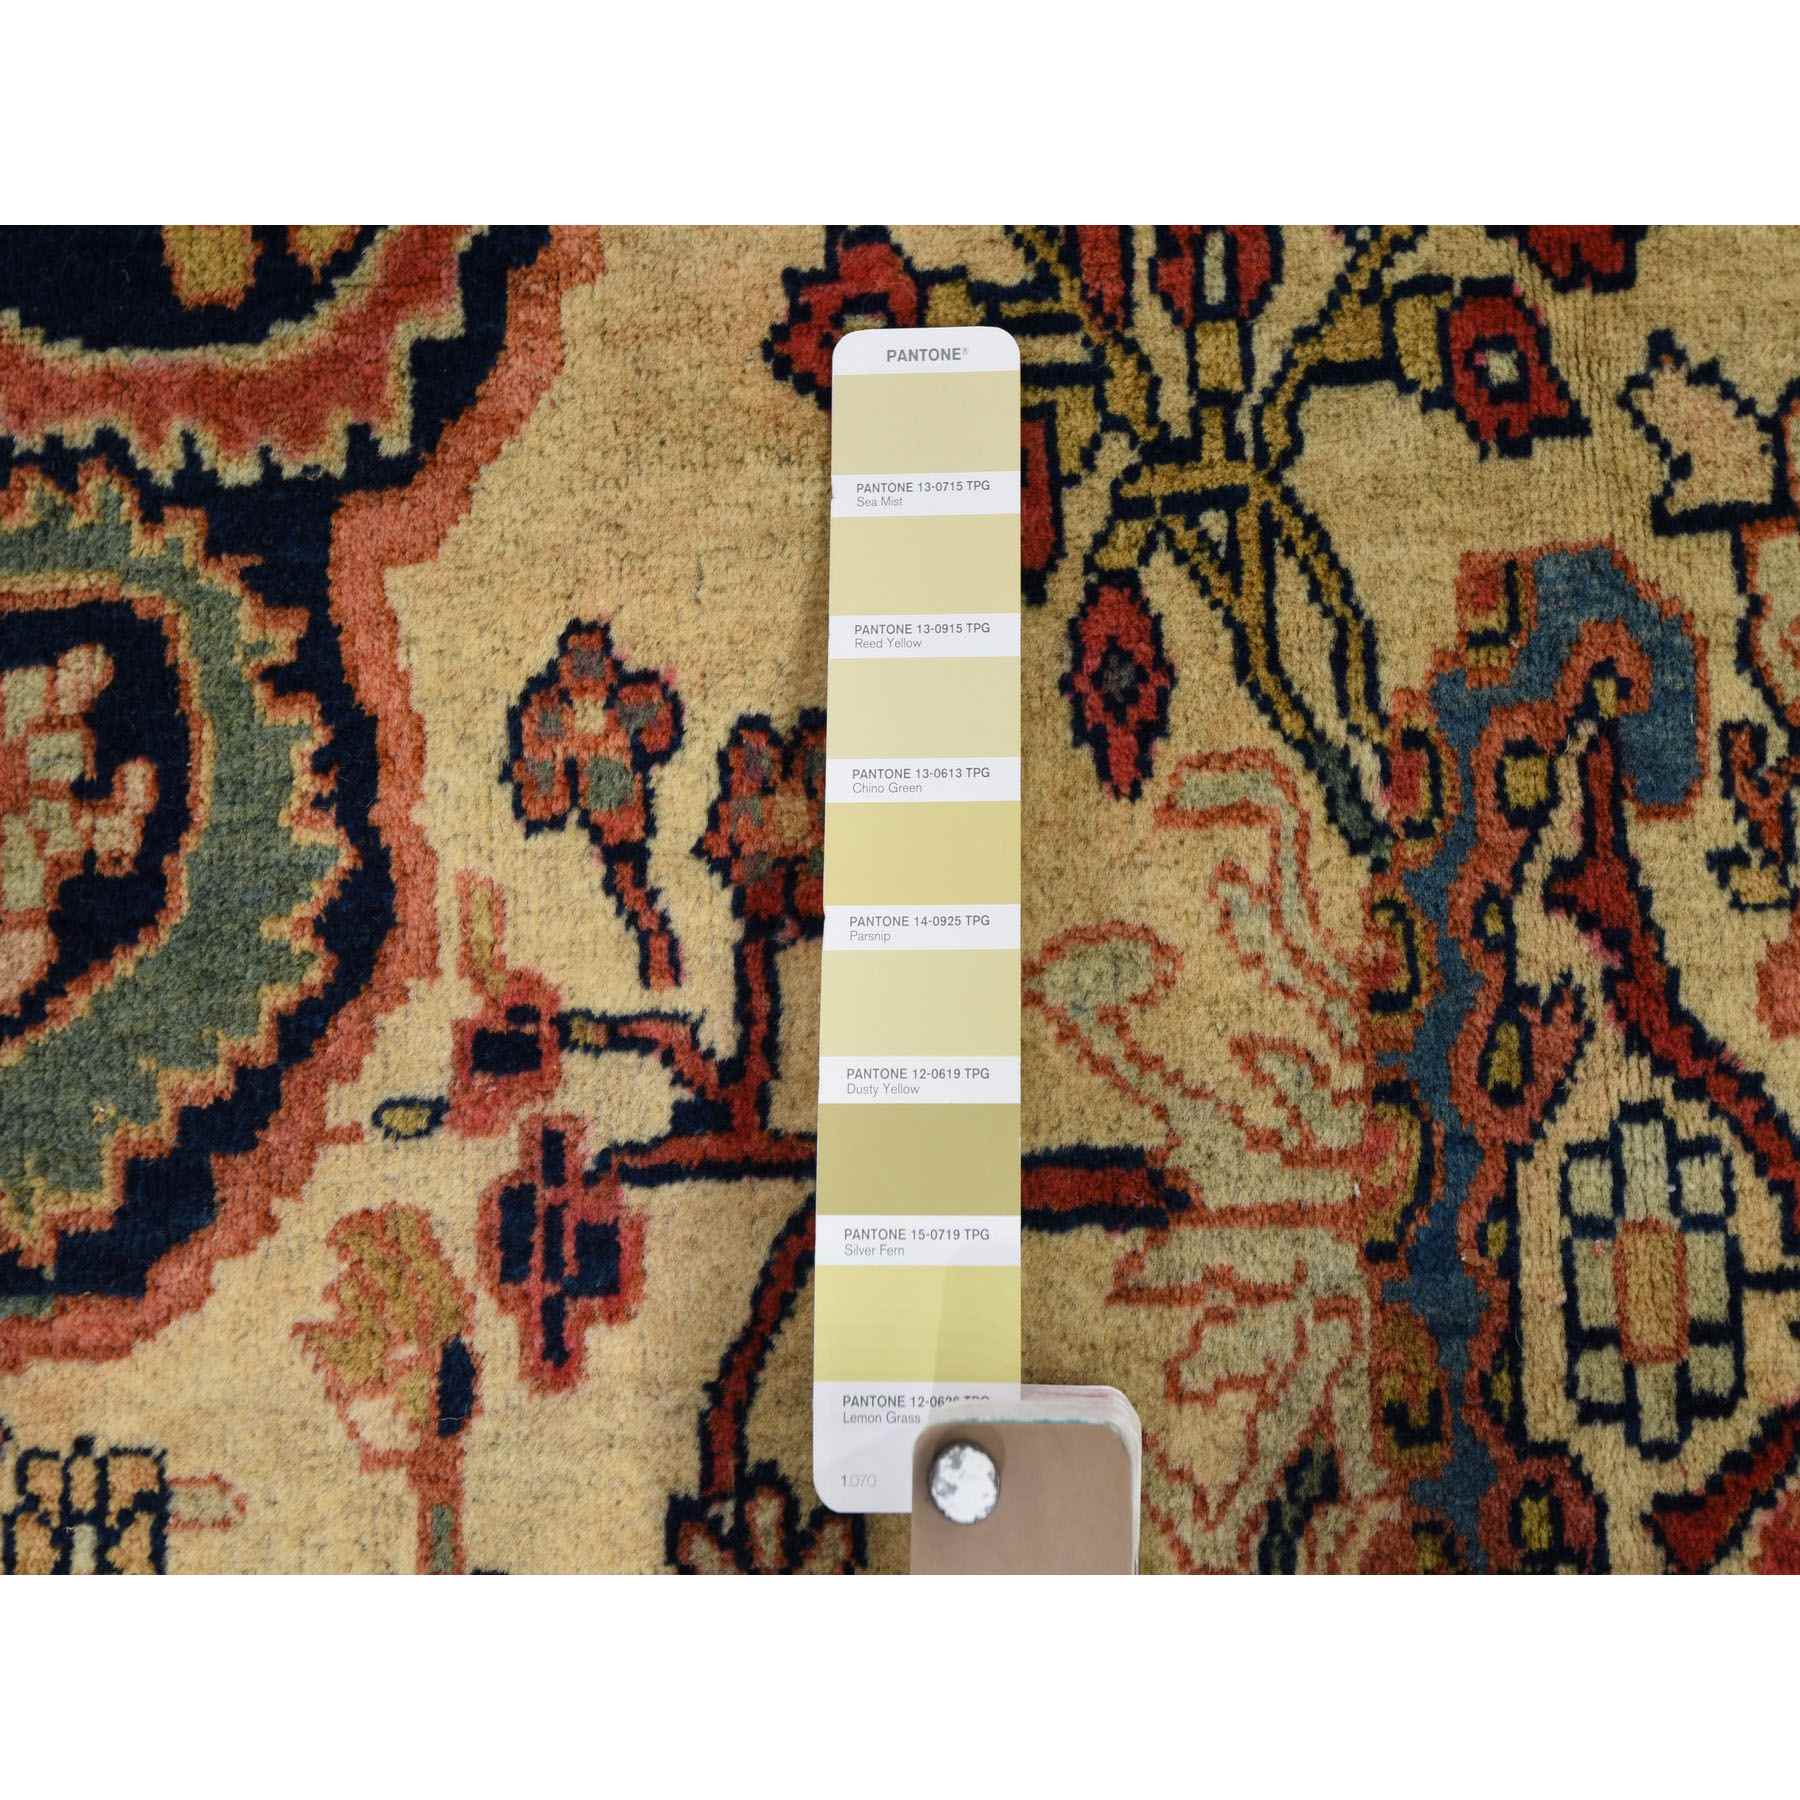 Antique-Hand-Knotted-Rug-243515